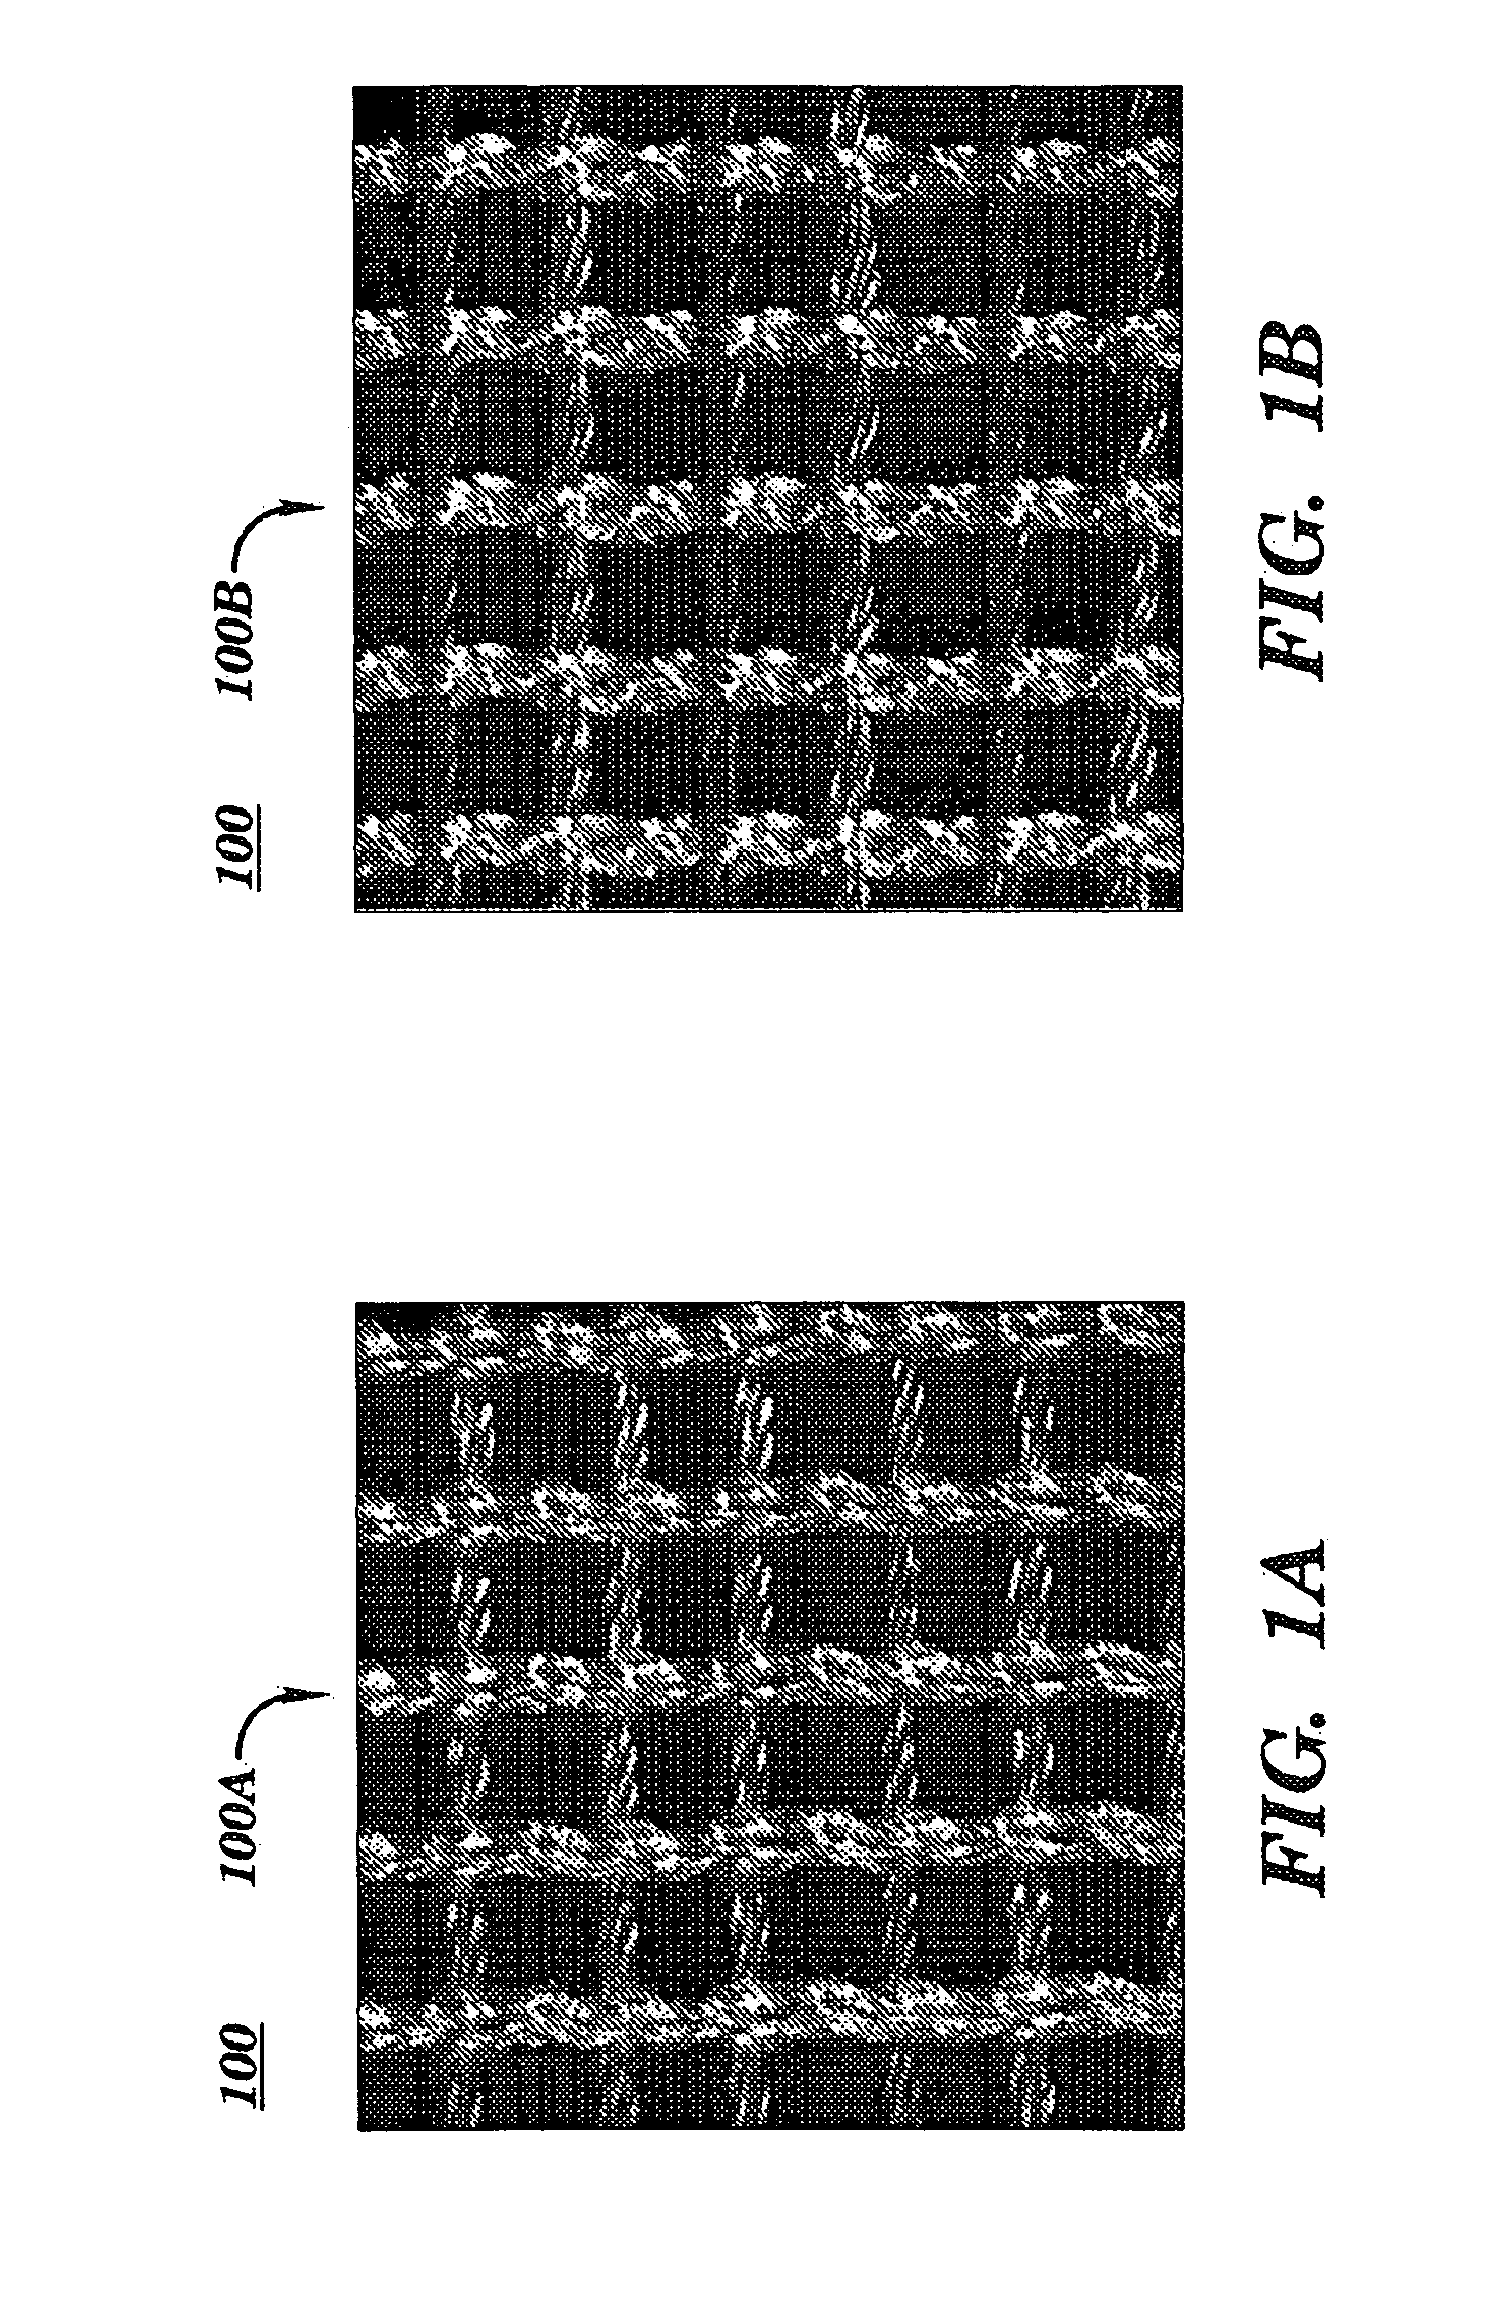 Method for making a knitted mesh